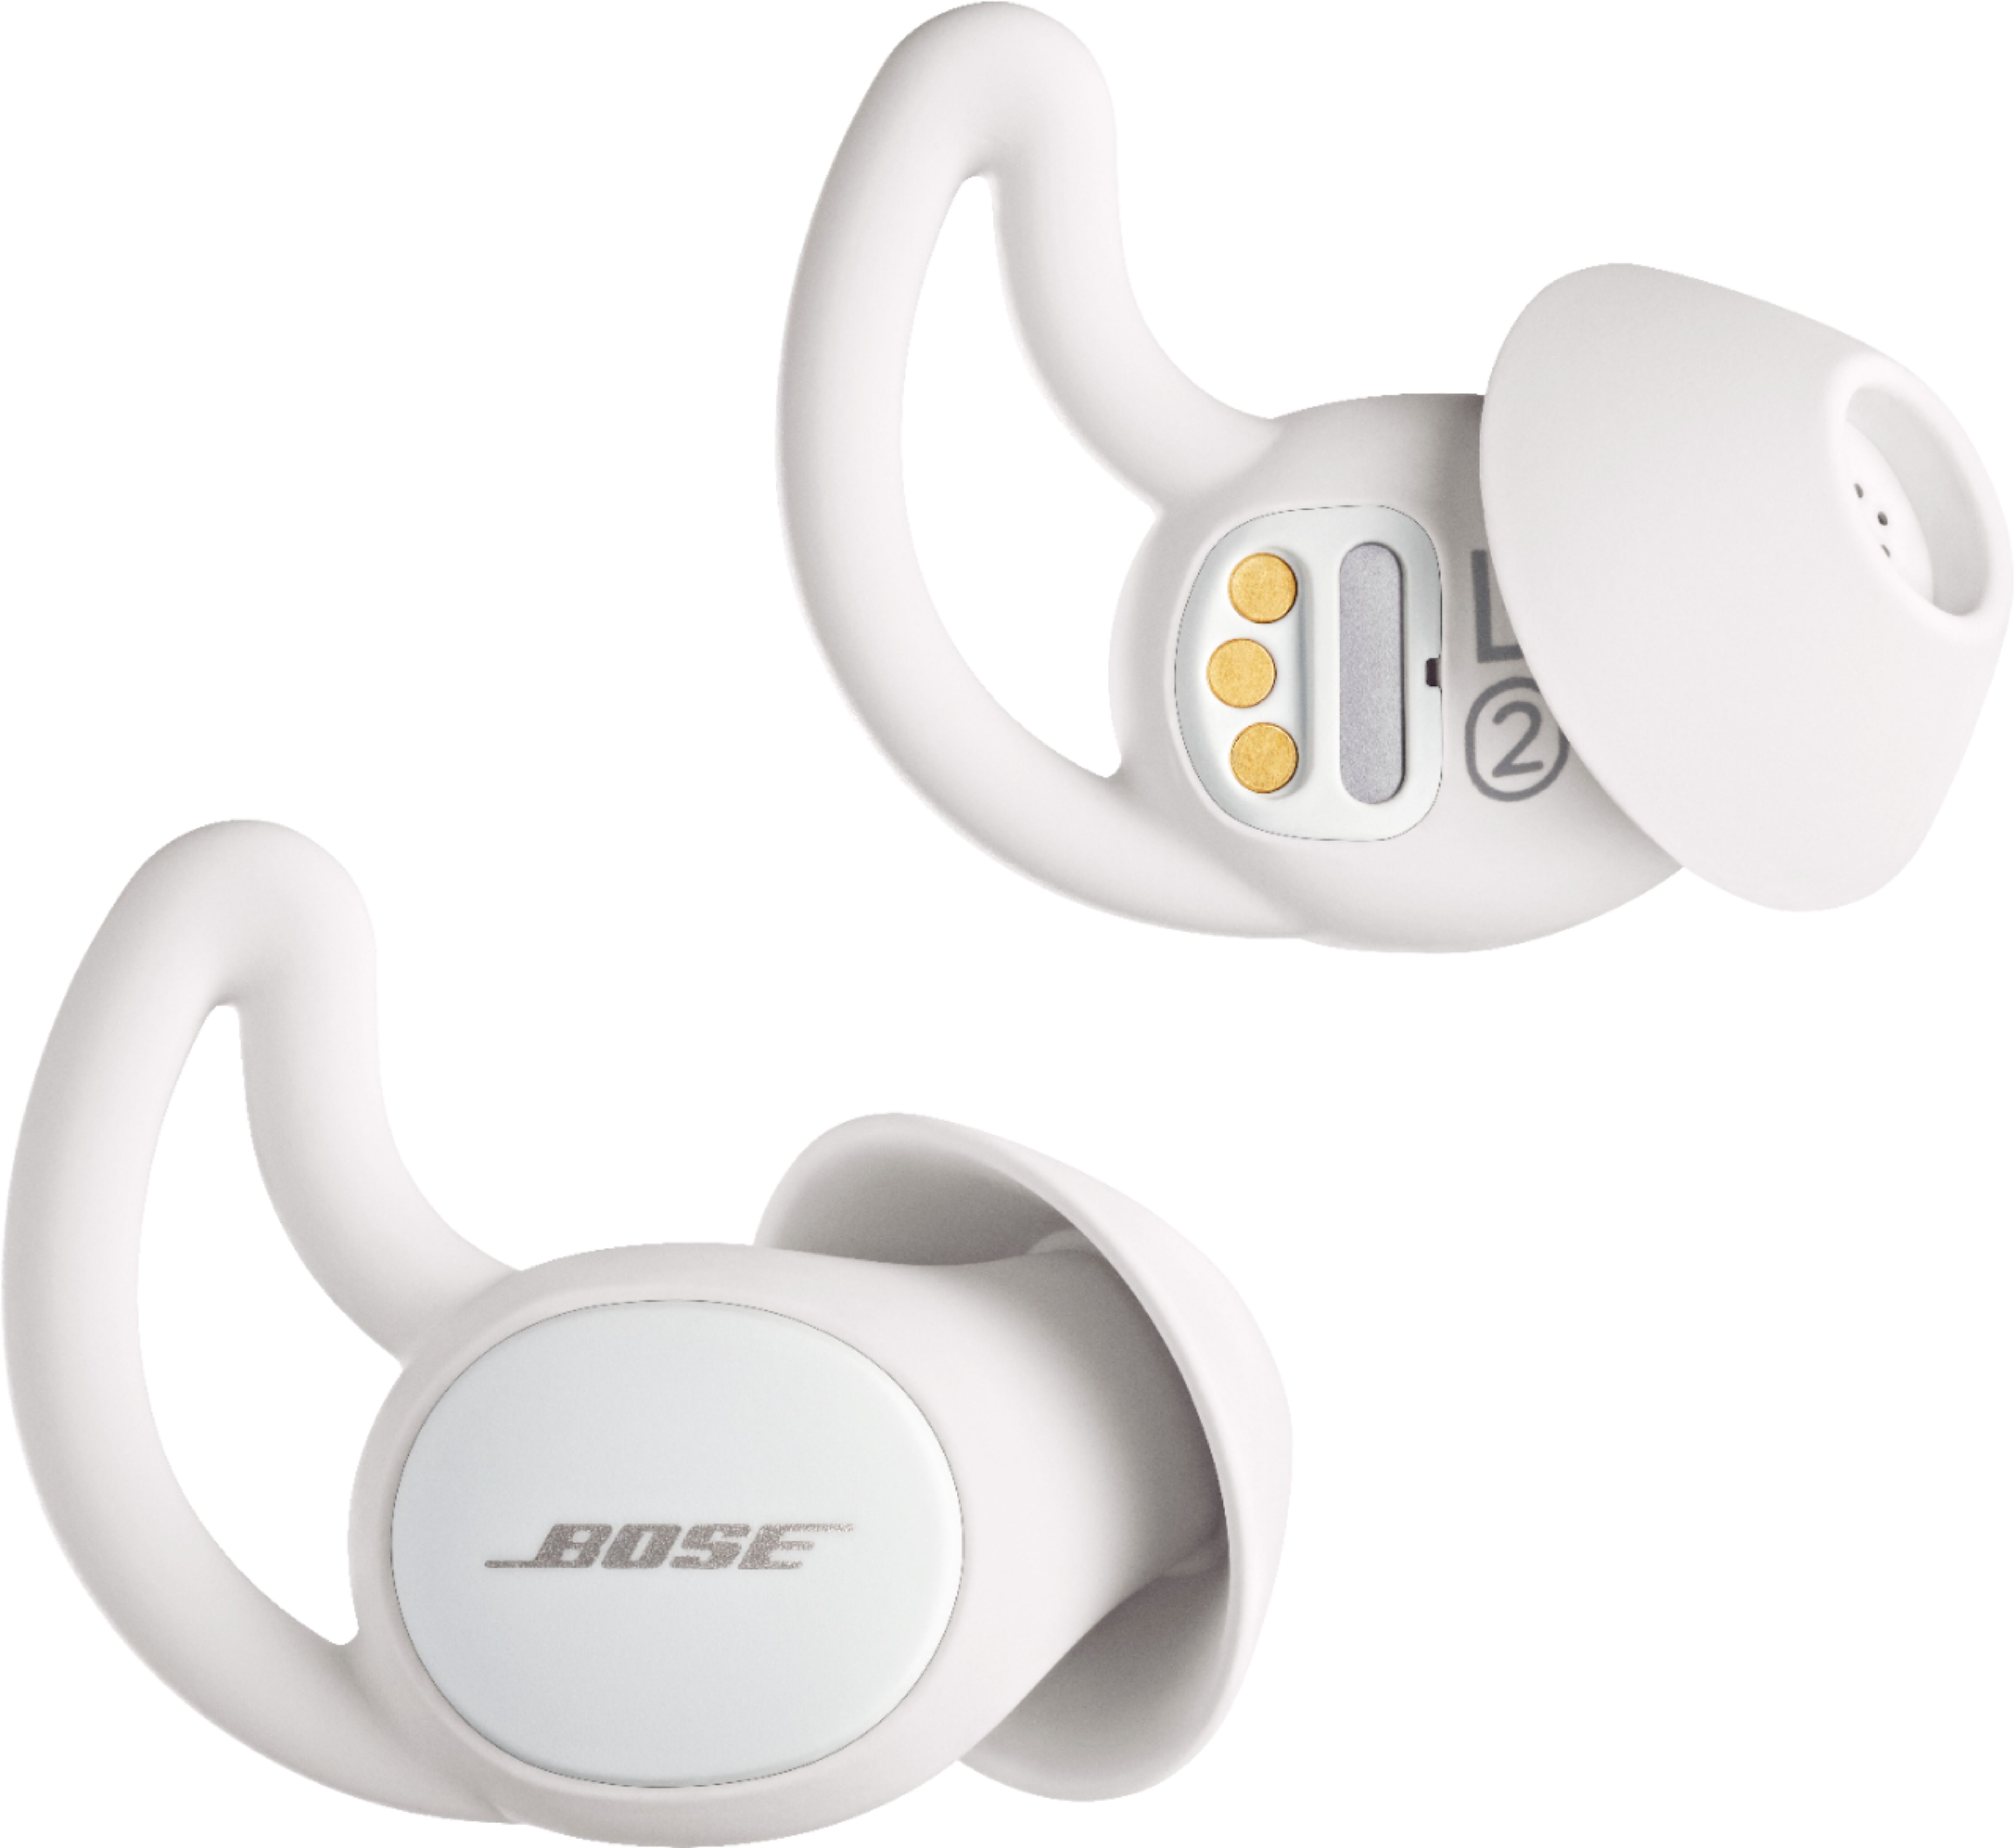 grå akse plus Best Buy: Bose Sleepbuds II — Soothing Sounds and Noise-masking Technology  Designed for Better Sleep White/Silver 841013-0010